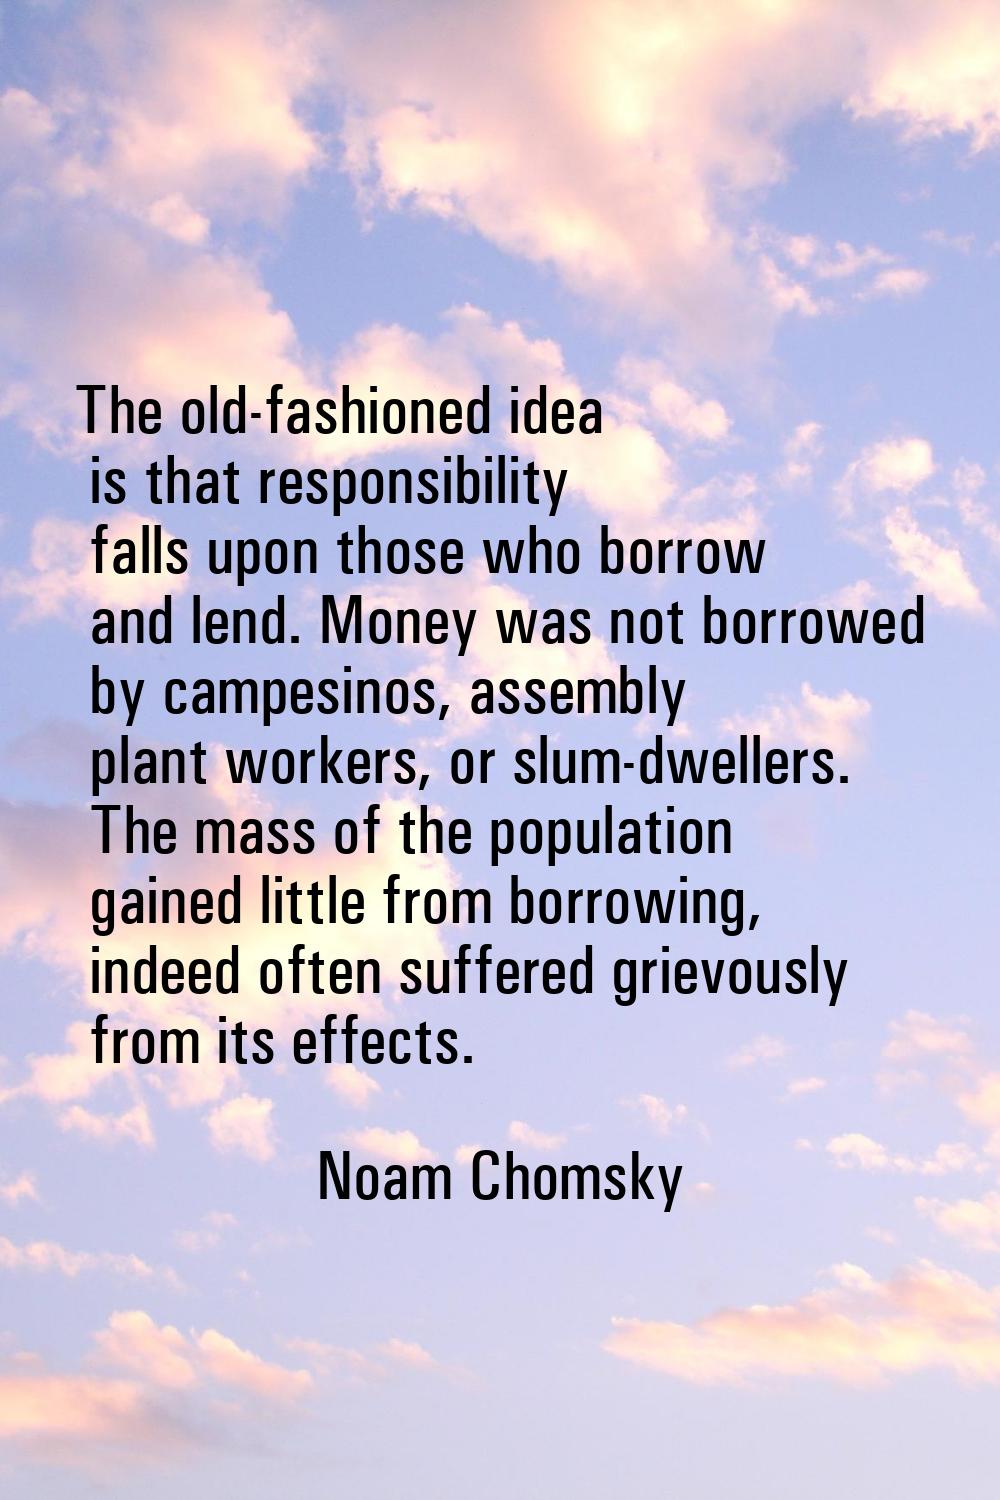 The old-fashioned idea is that responsibility falls upon those who borrow and lend. Money was not b